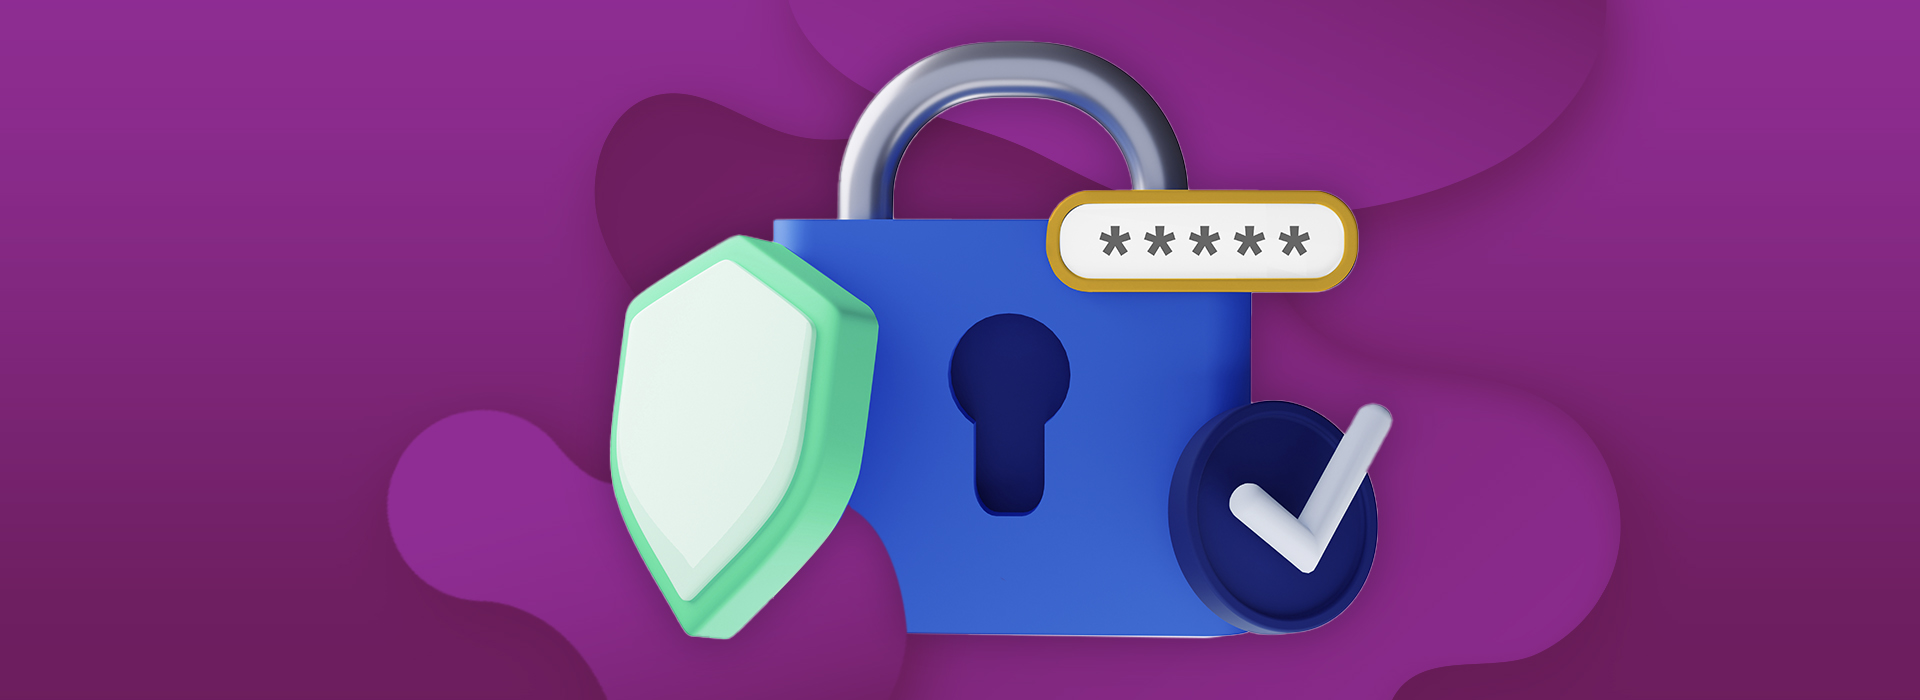 a large blue lock, surrounded by a green shield, a tick, and star ratings.